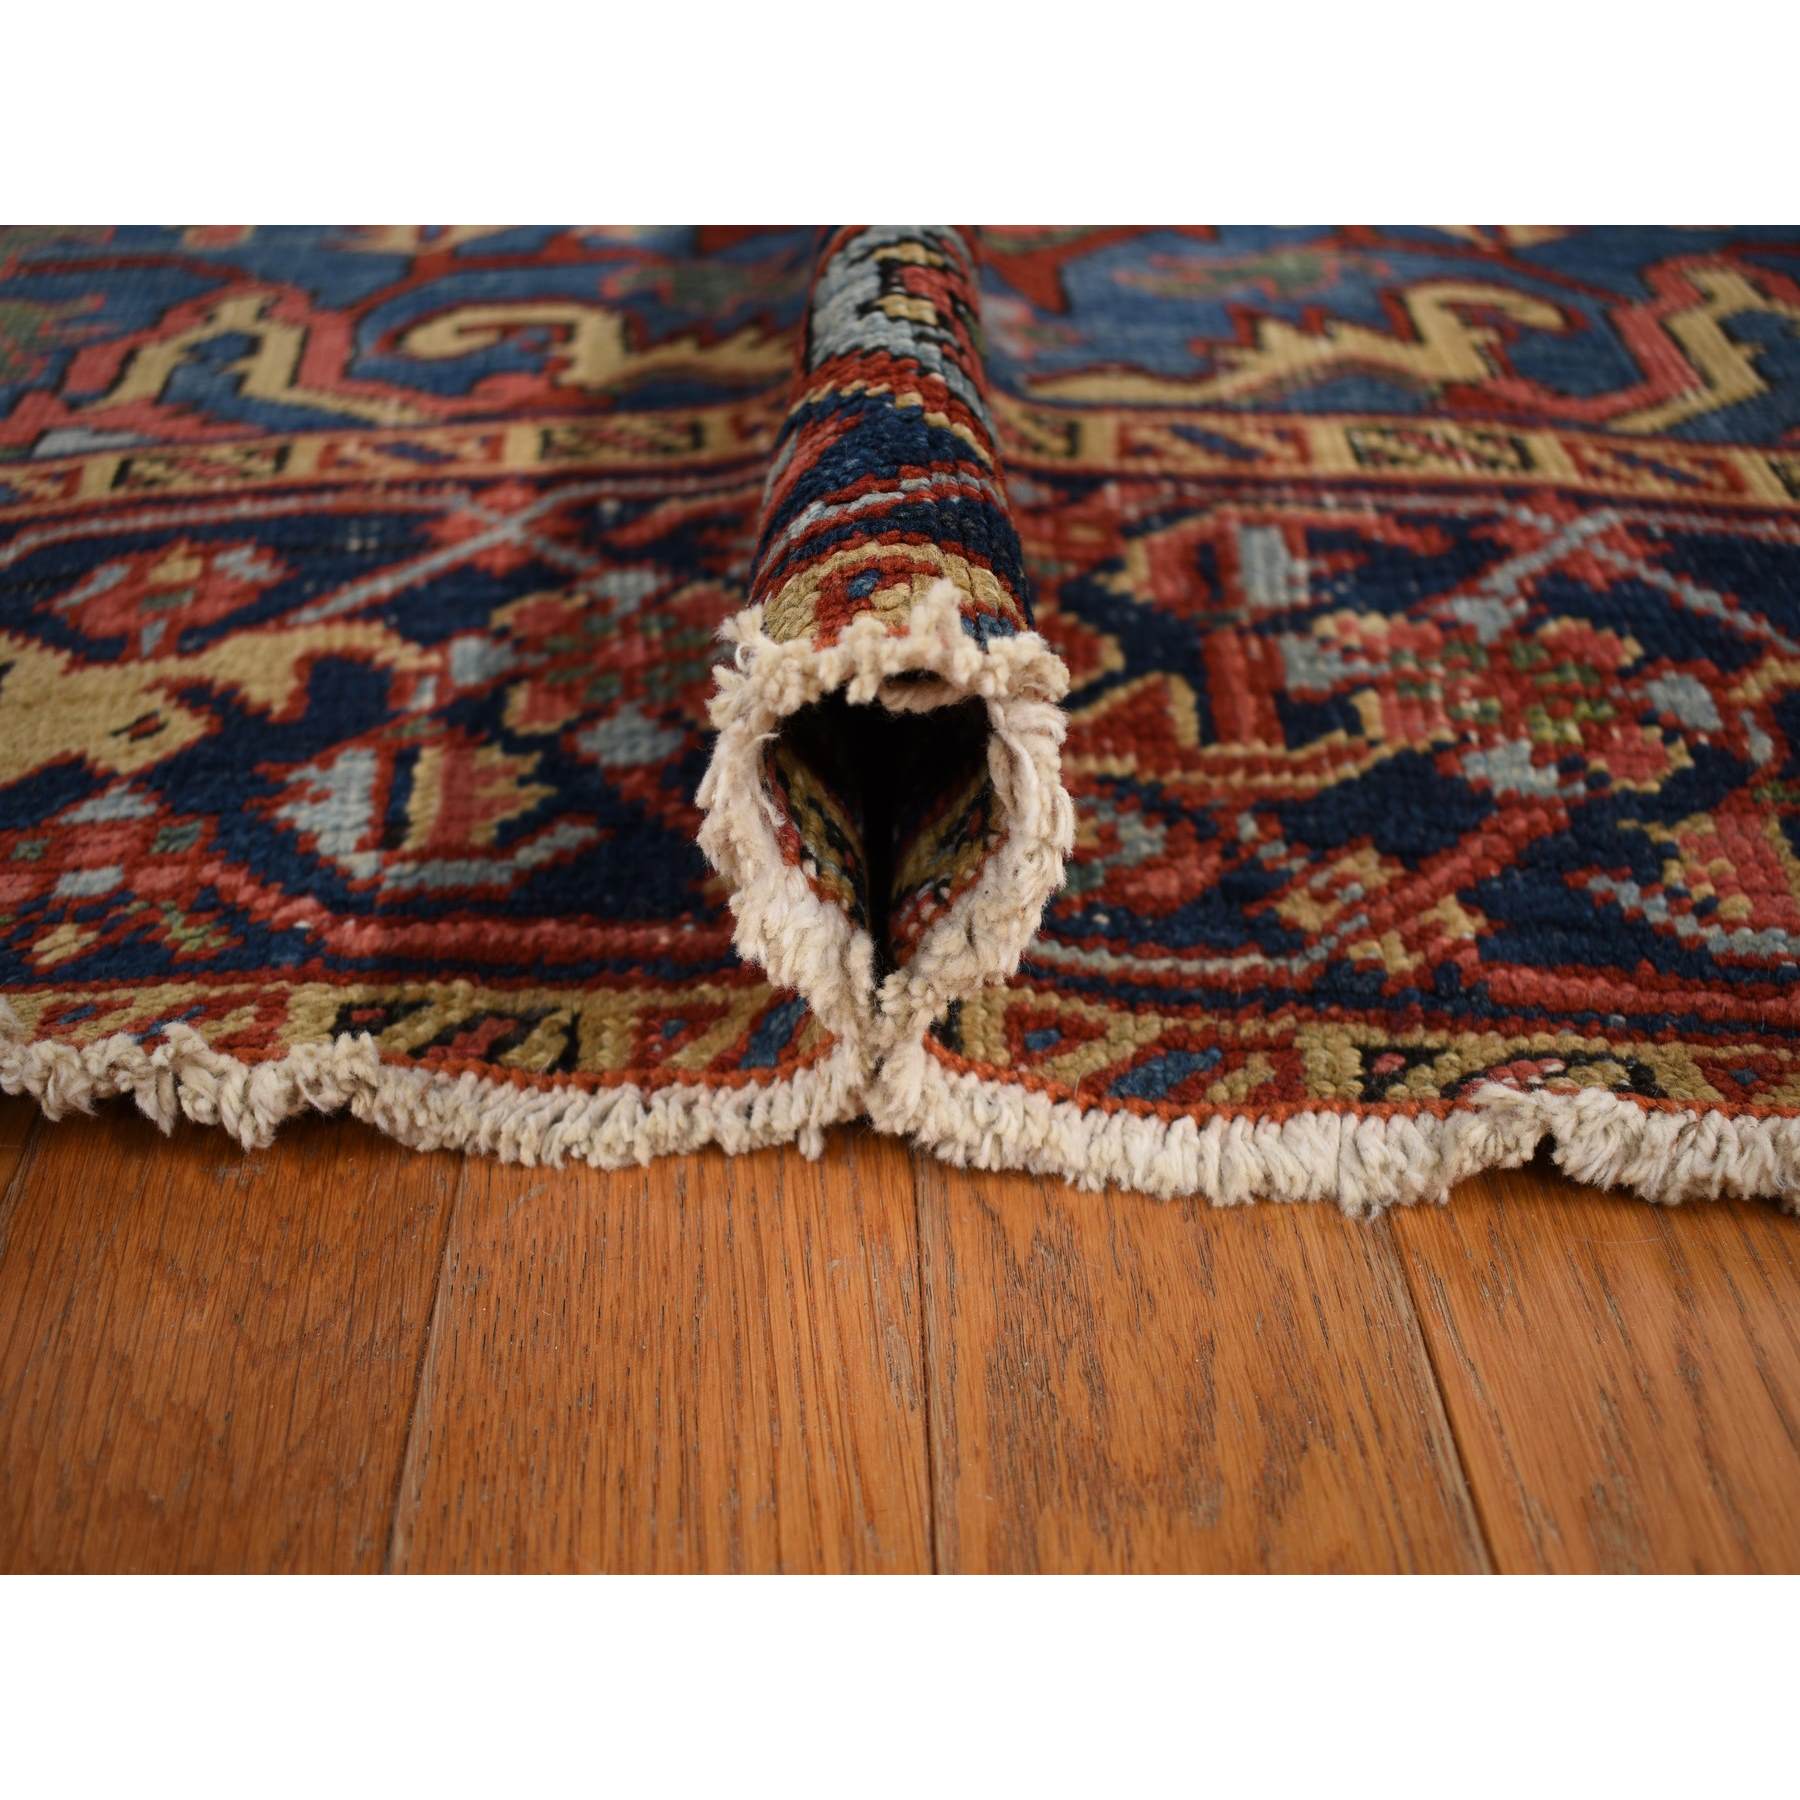 Antique-Hand-Knotted-Rug-390885